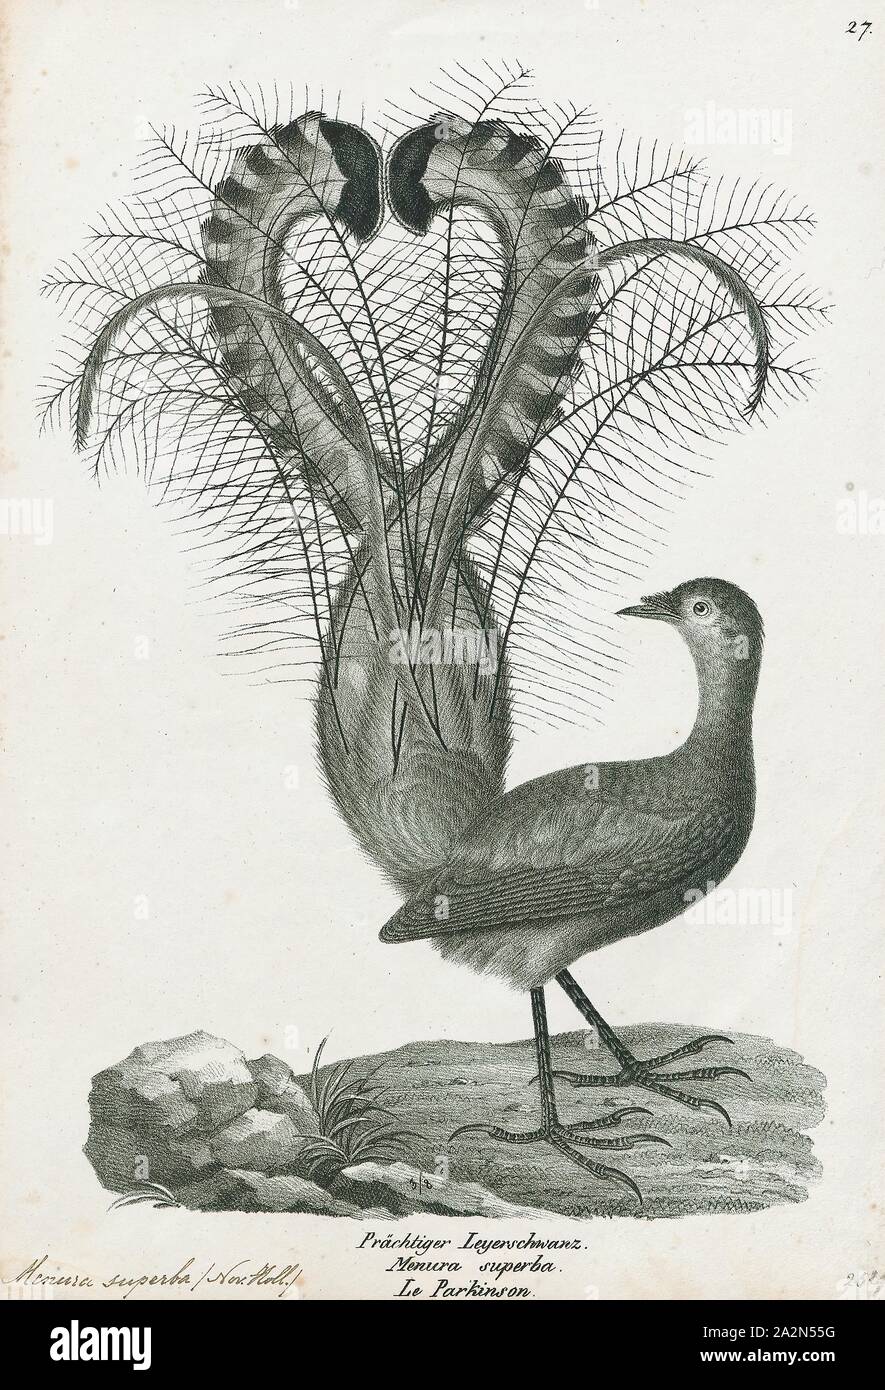 Menura superba, Print, The superb lyrebird (Menura novaehollandiae) is an  Australian songbird, one of two species from the family Menuridae. It is  one of the world's largest songbirds, and is renowned for